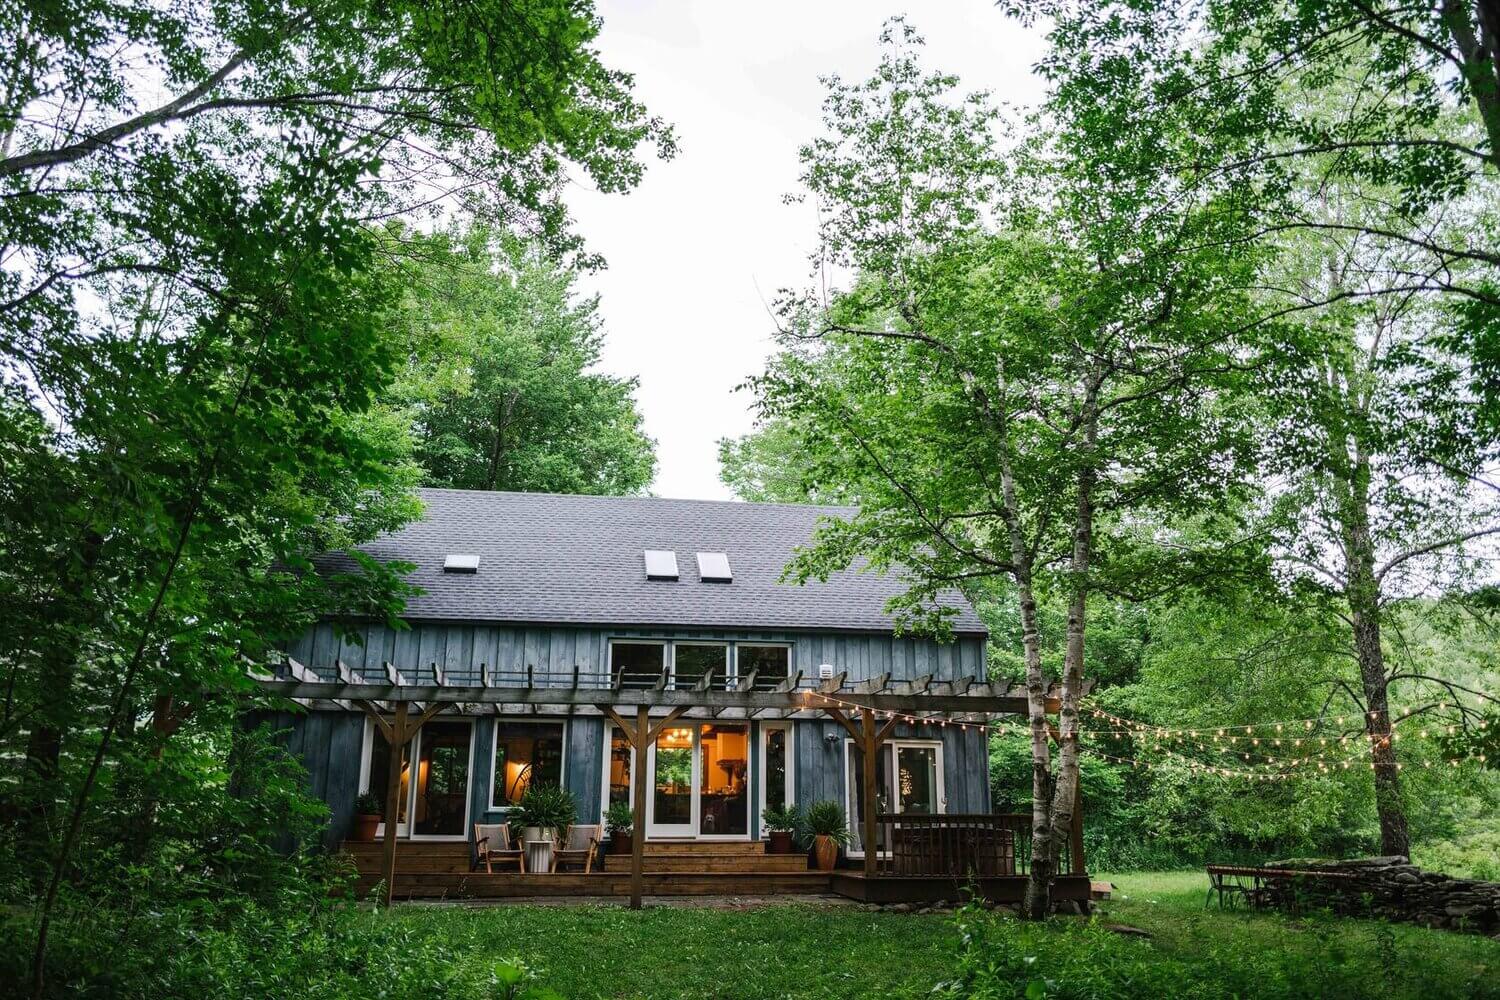 the hunter barnhouse airbnb nordroom35 The Hunter Barnhouse: A Stylish Slow Living Airbnb Surrounded by Nature